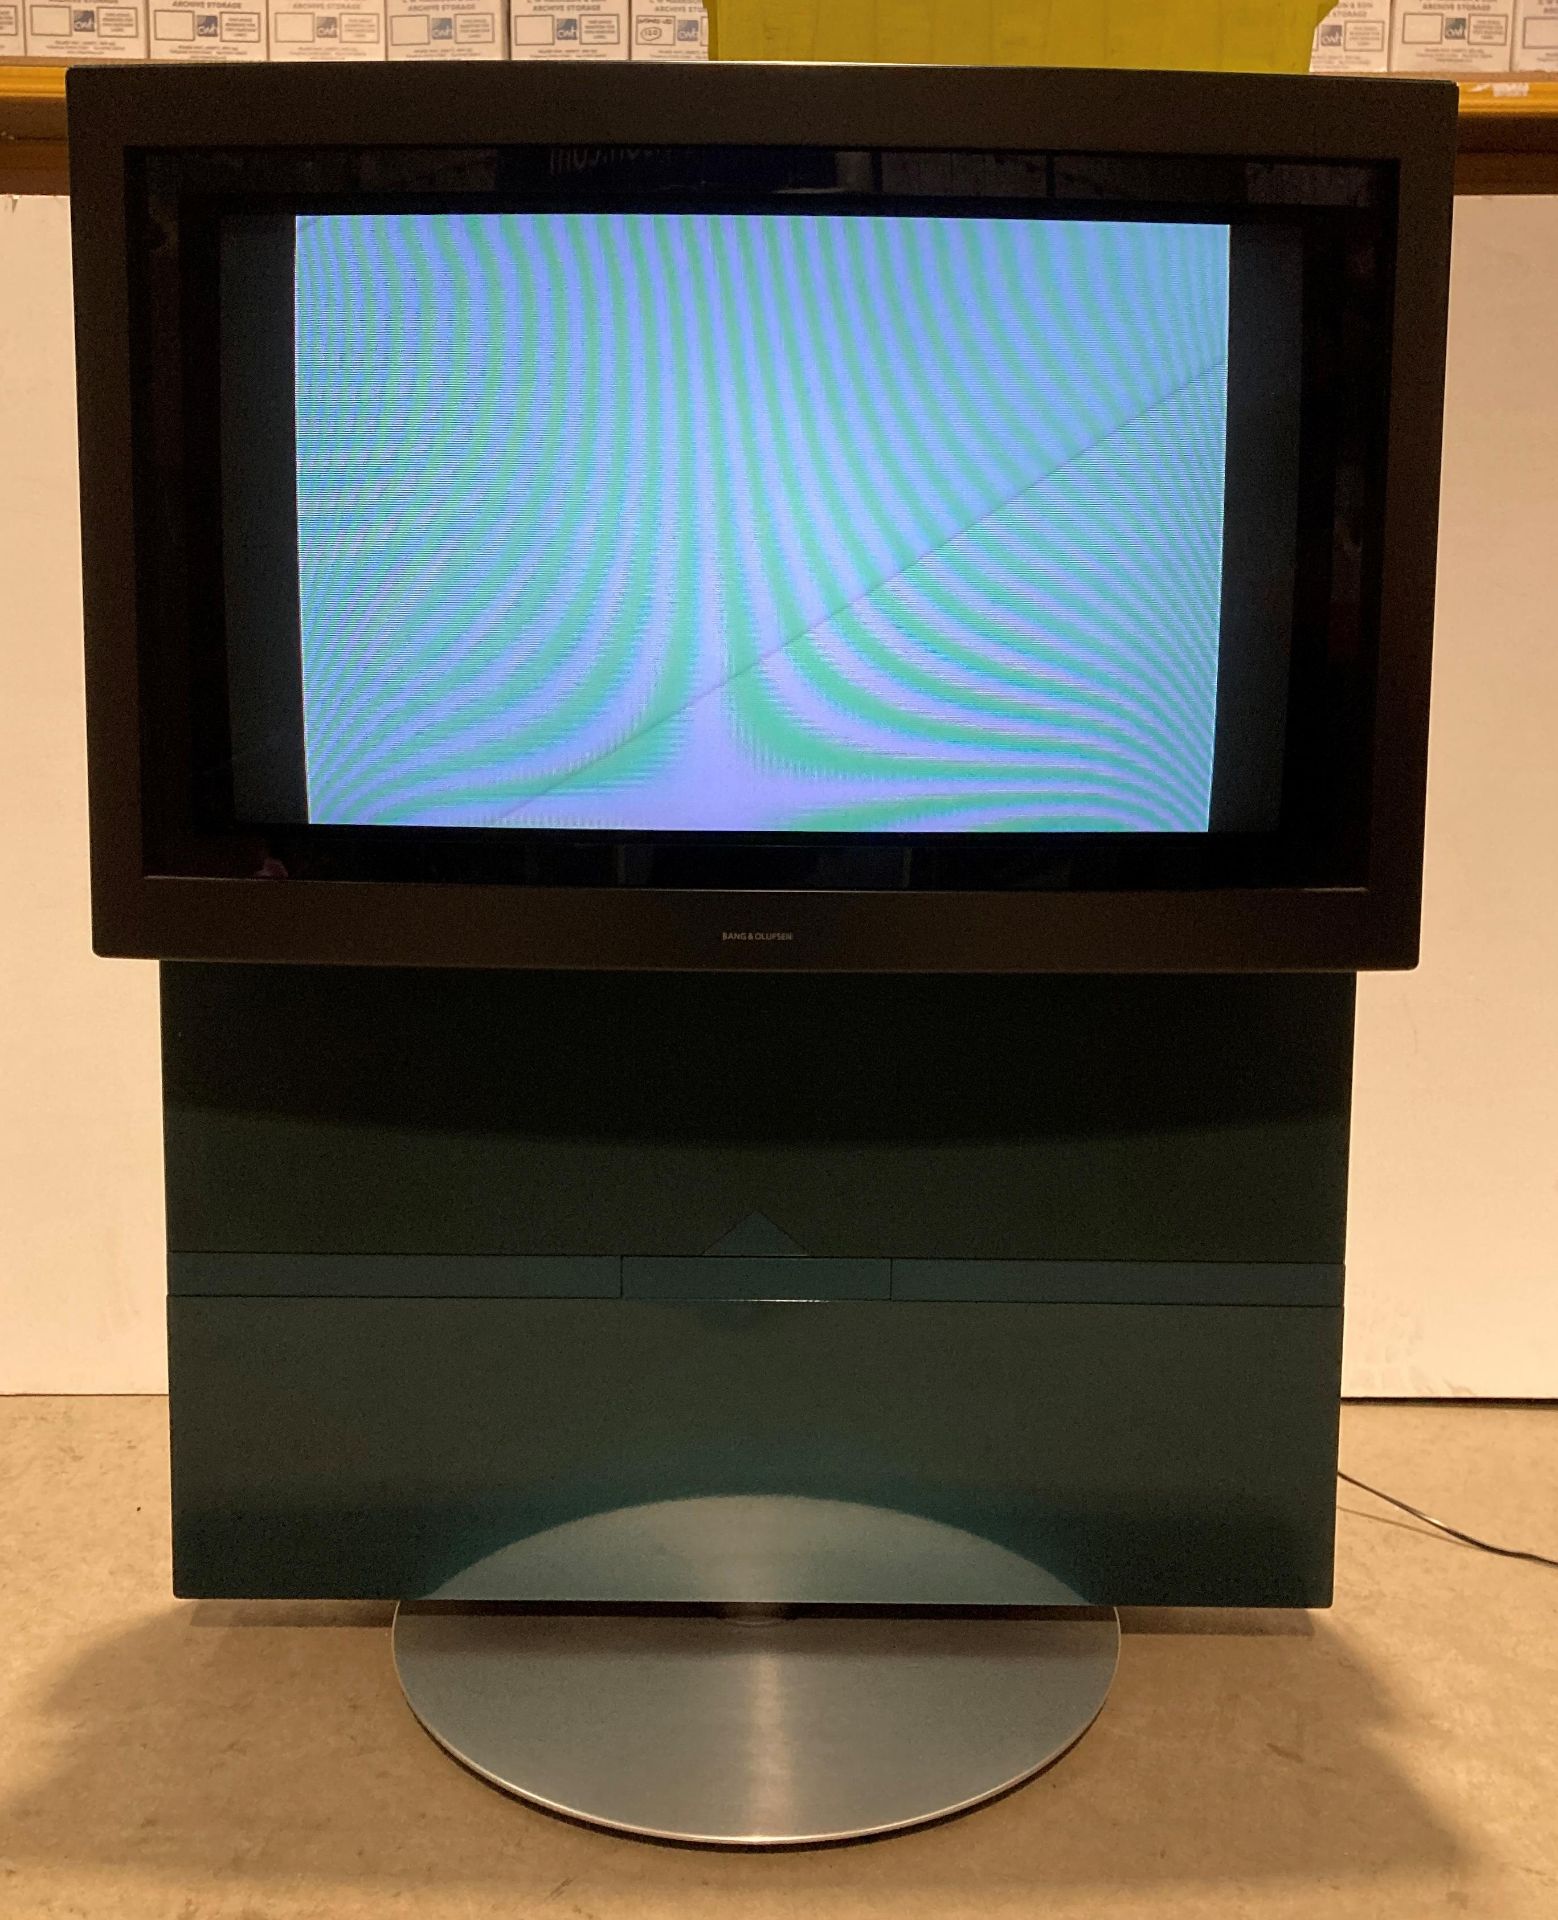 Bang & Olufsen BeoVision Avant television, acc. VTR NIC DS, item no.